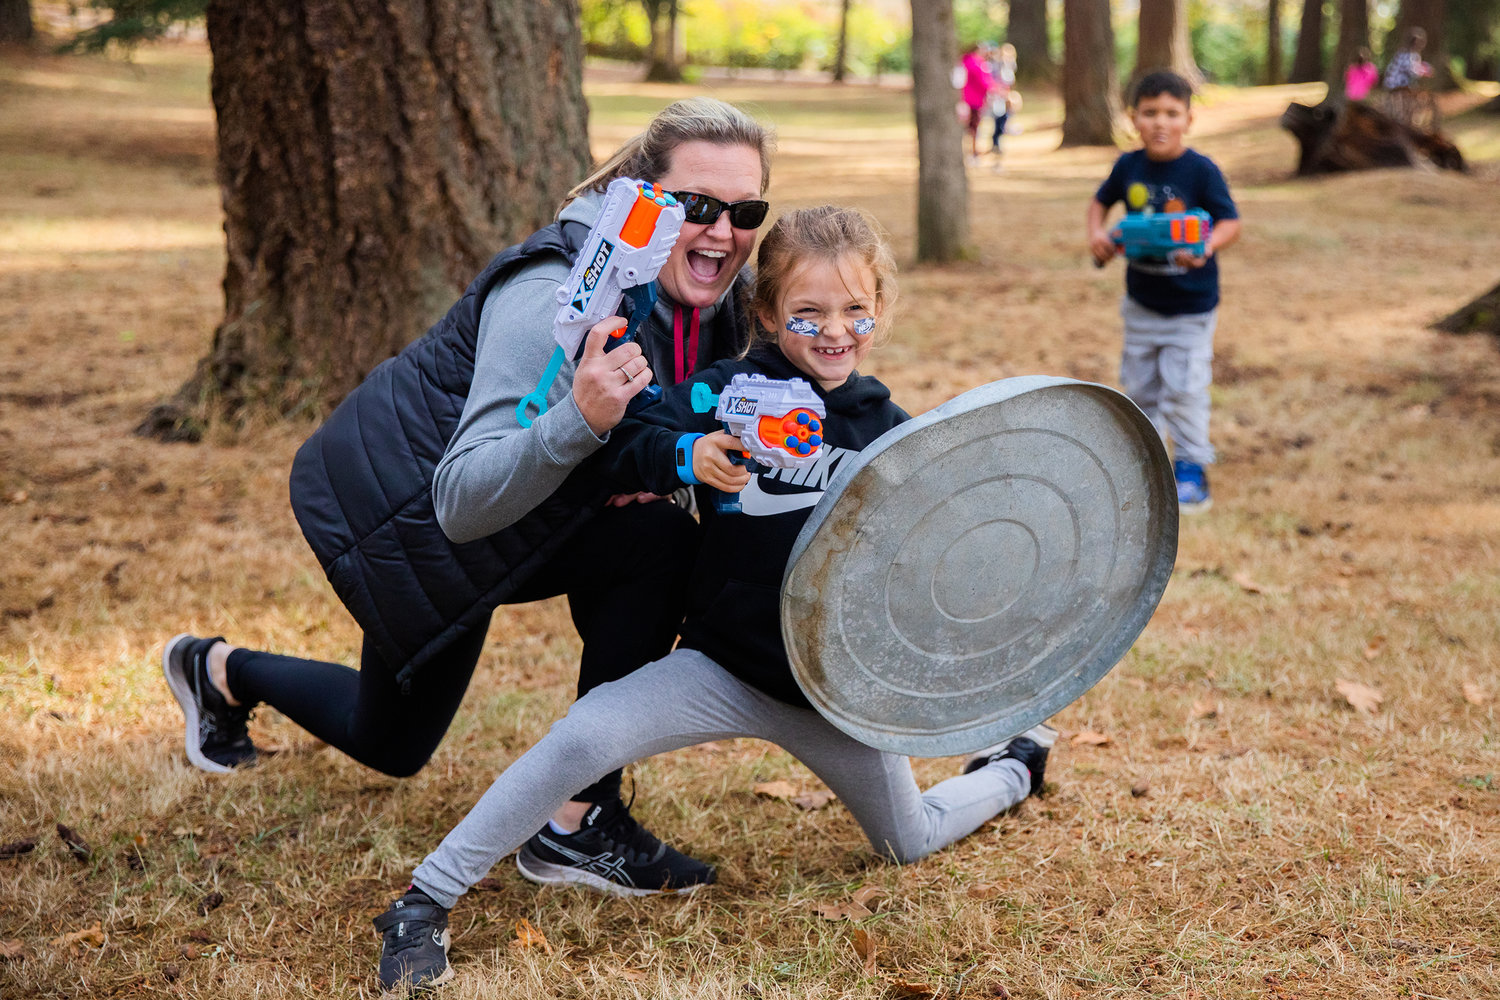 Andra Hankins and Addy, 7, smile for a photo with blasters and a trash can lid shield in hand on Sunday during a Nerf War in honor of Titus Sickles and his Live Life List Fundraiser.